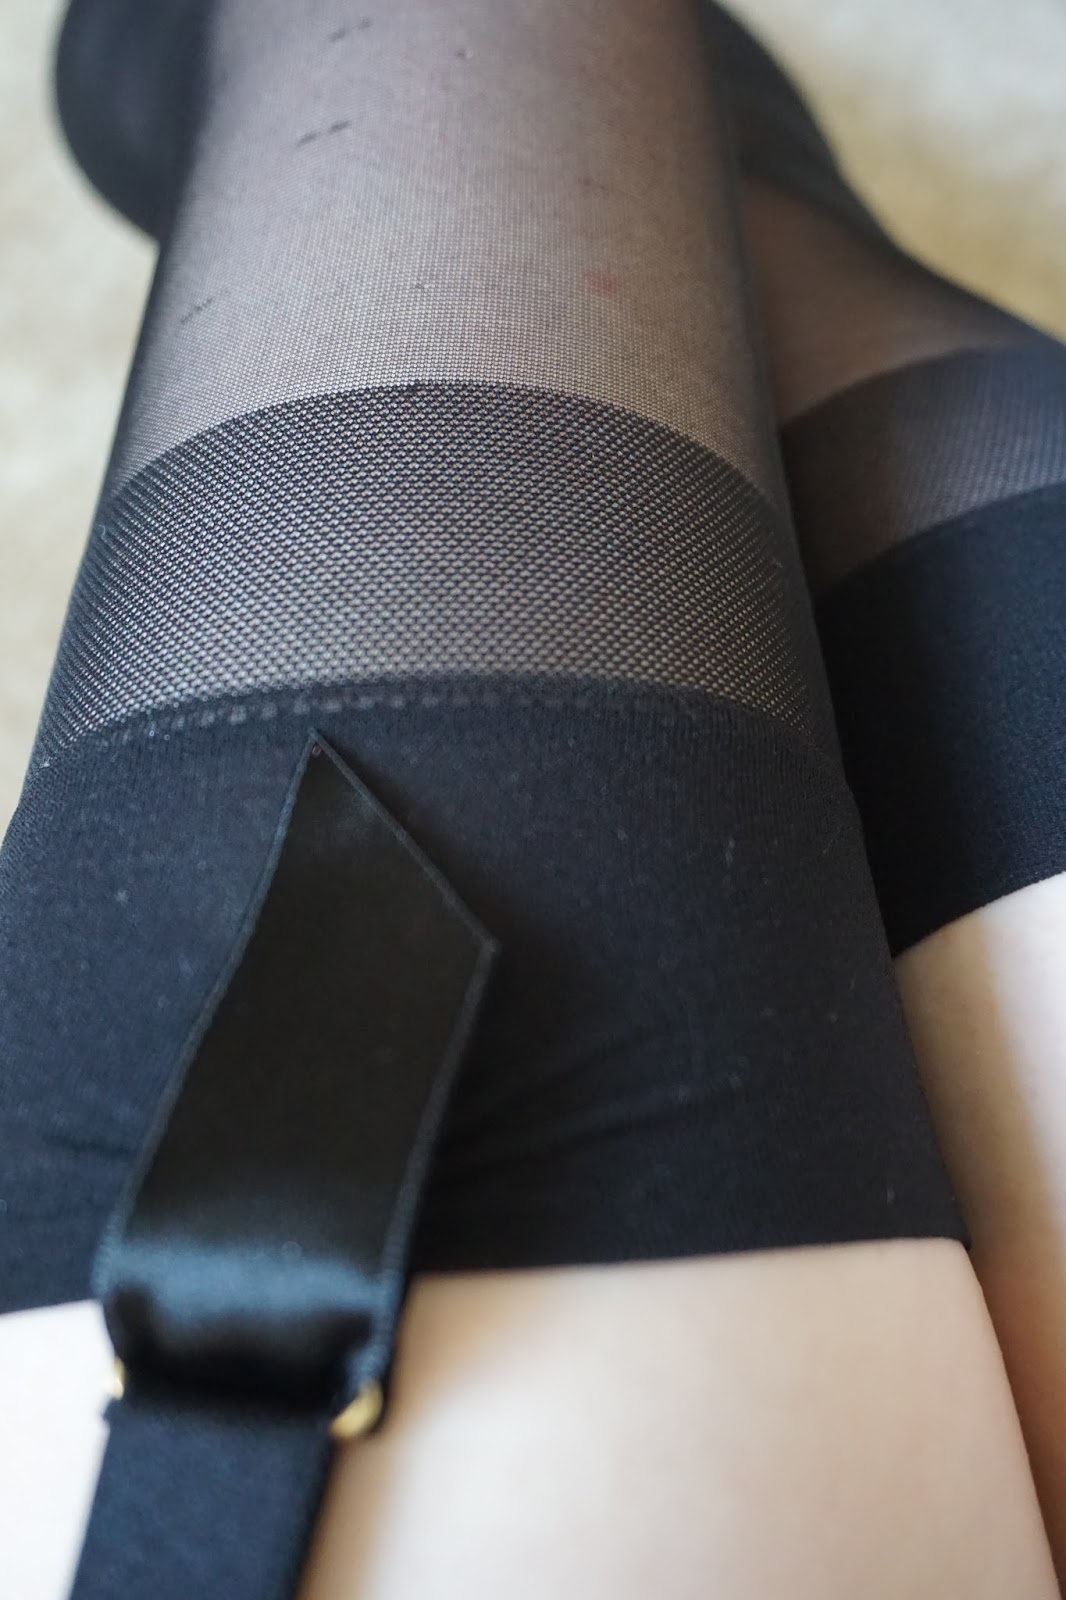 Tights Ladders: My ever stockings review - Trasparenze Sara Stockings